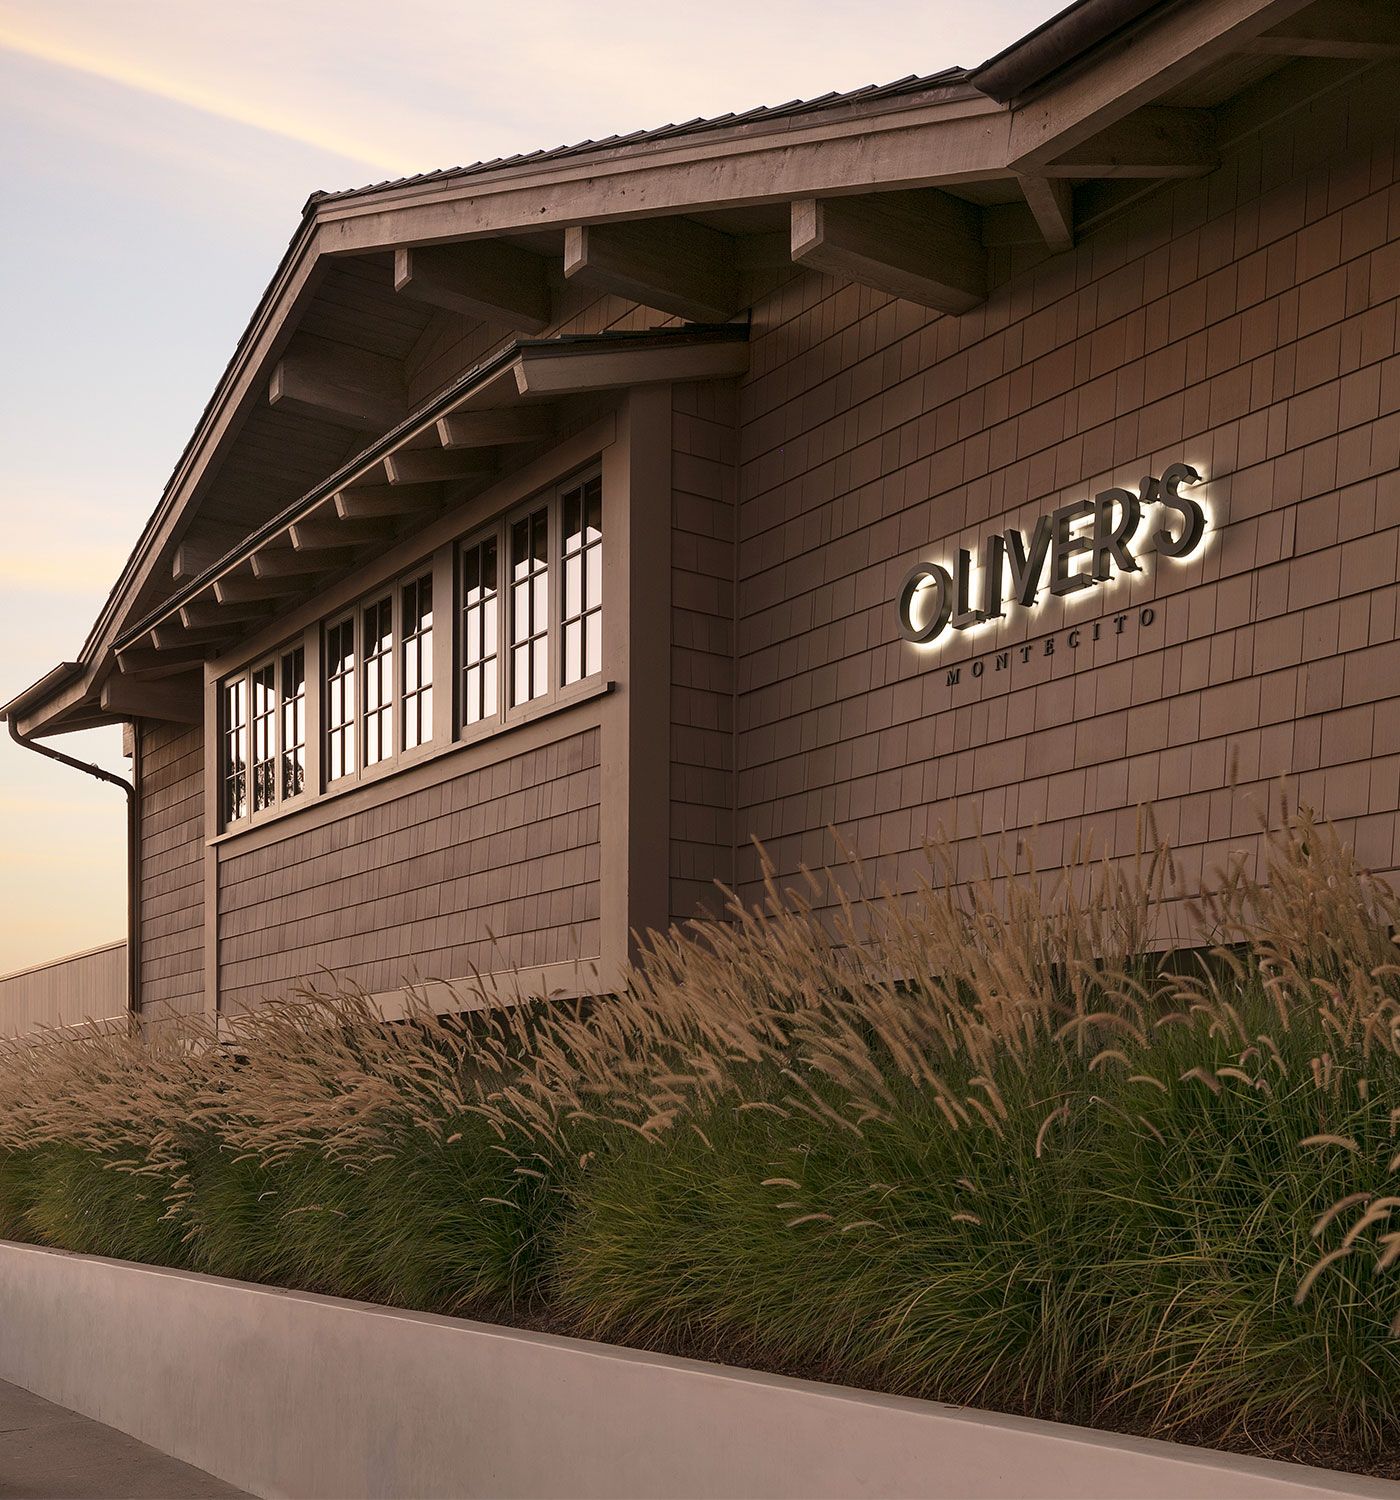 The brown shingle exterior of Oliver's Restaurant in Montecito